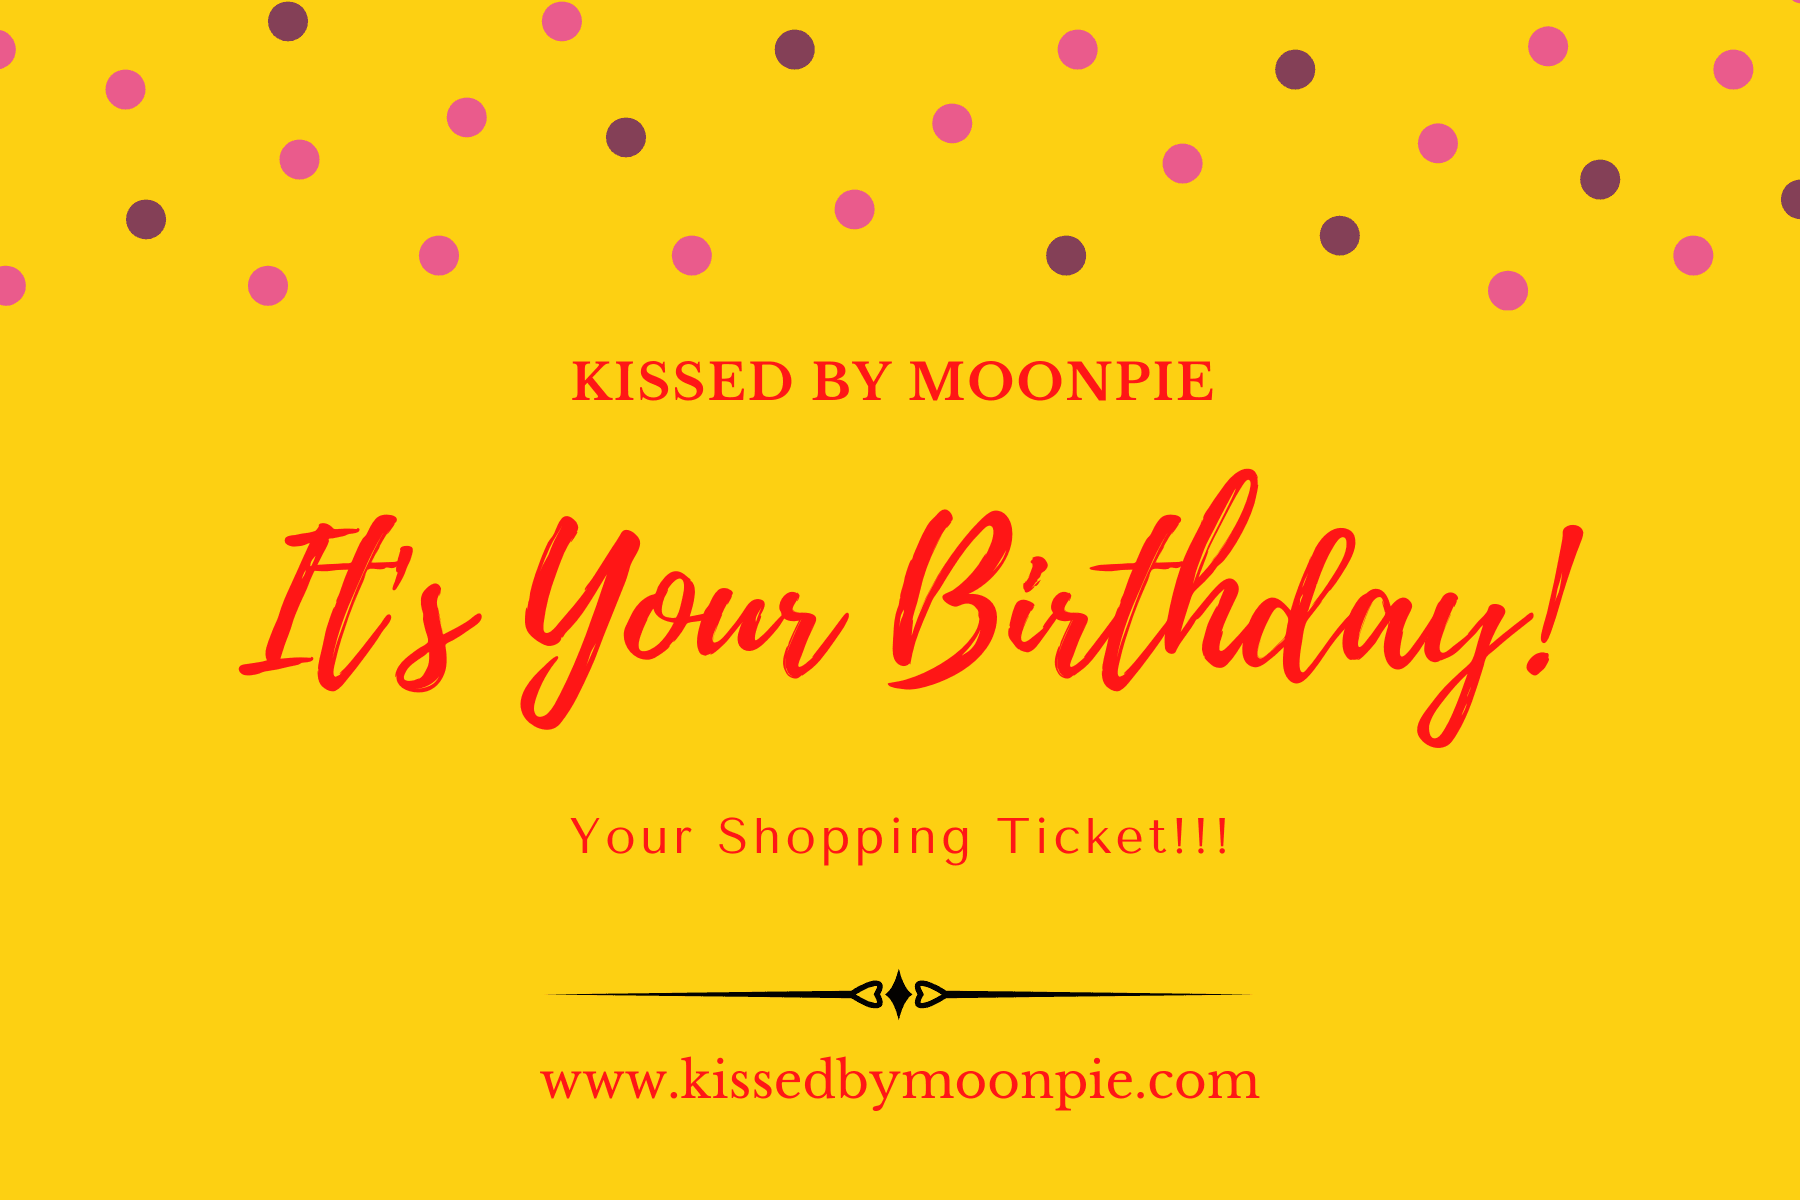 KISSED BY MOONPIE HAPPY BIRTHDAY GIFT CARD - Kissed By MoonPie